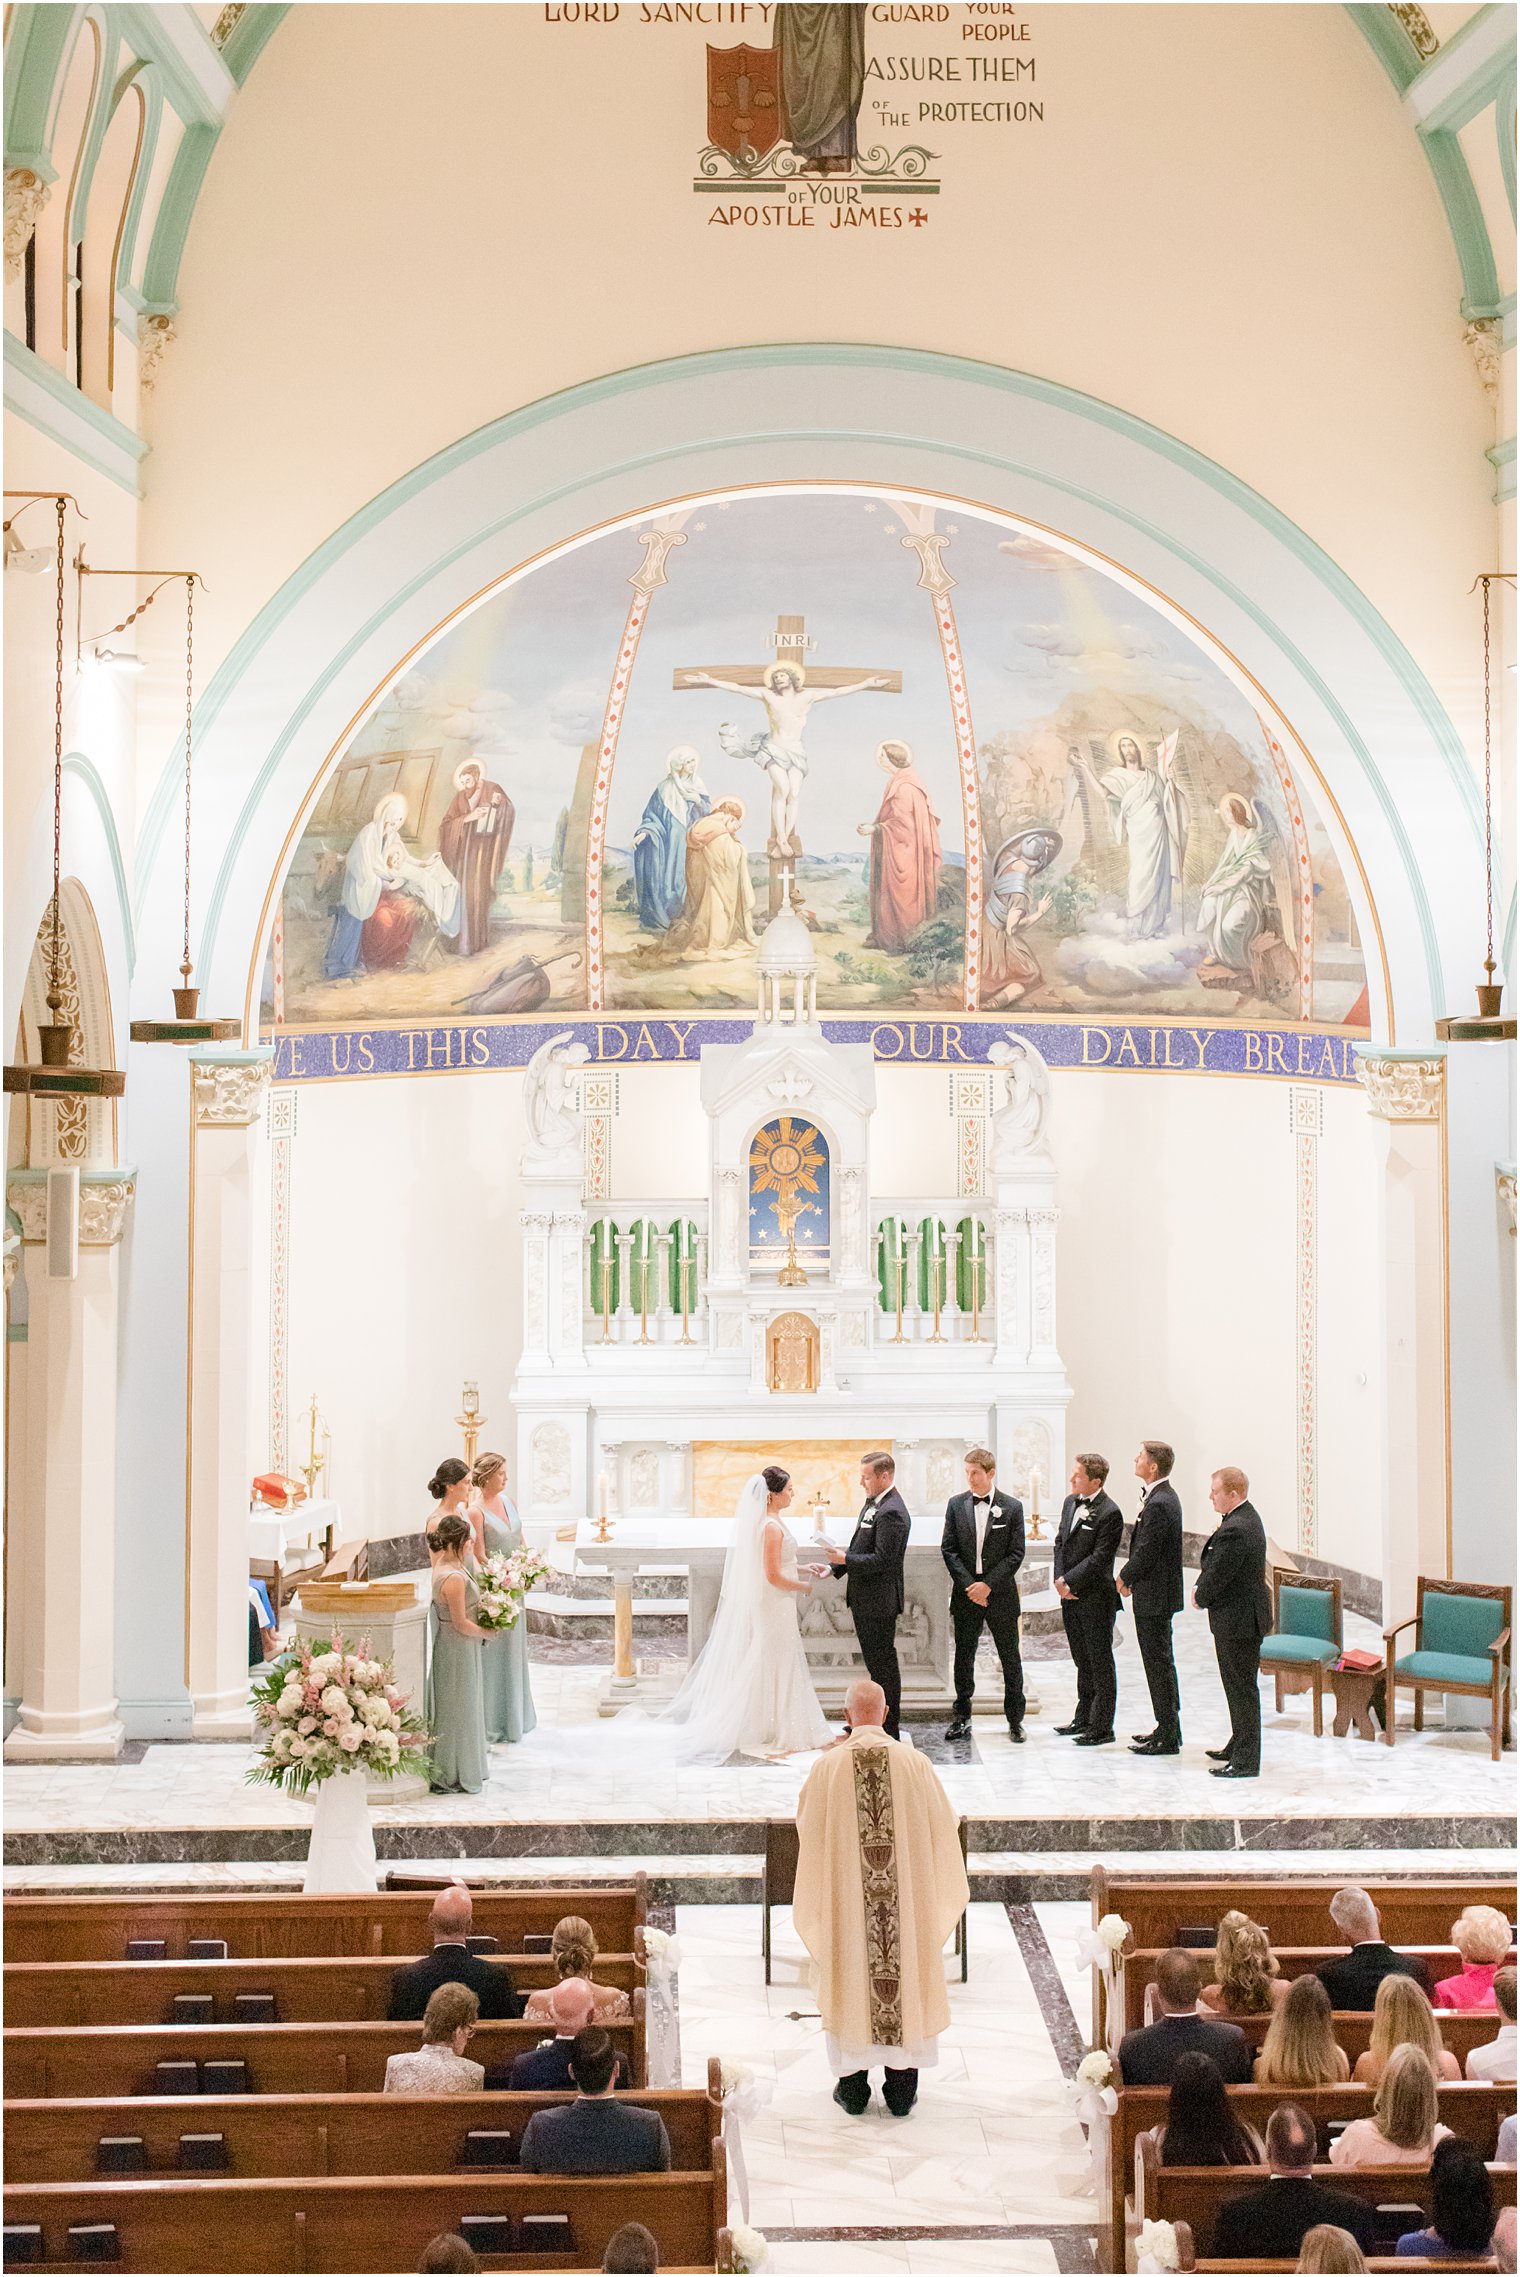  traditional wedding ceremony at St. James church